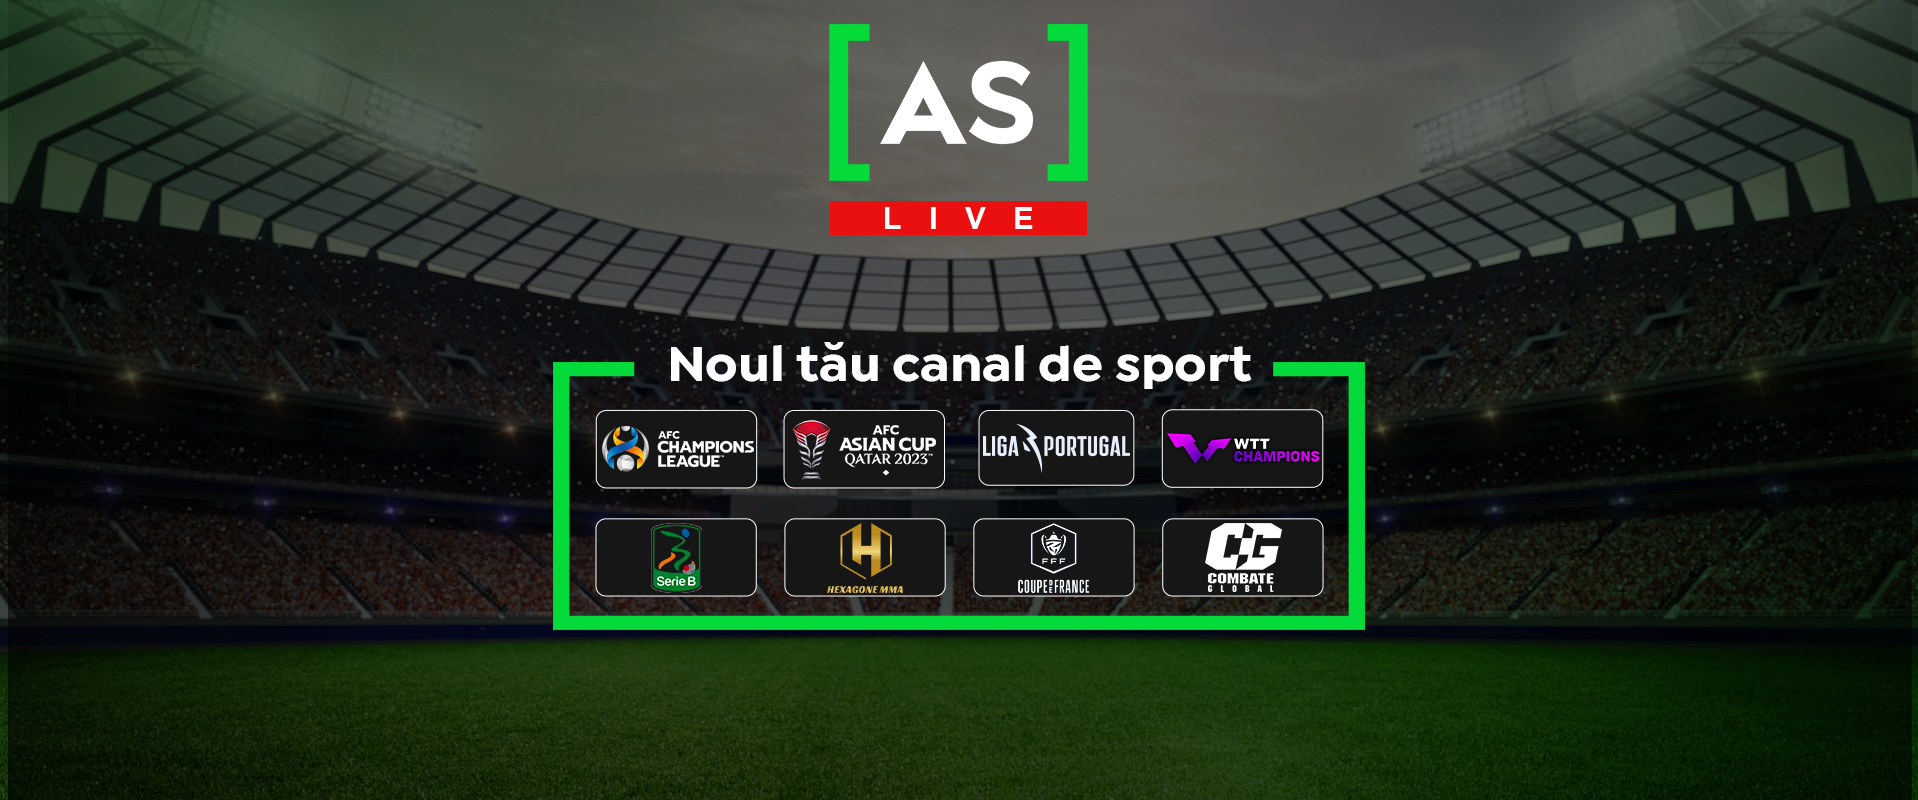 Ai sport in AntenaPLAY